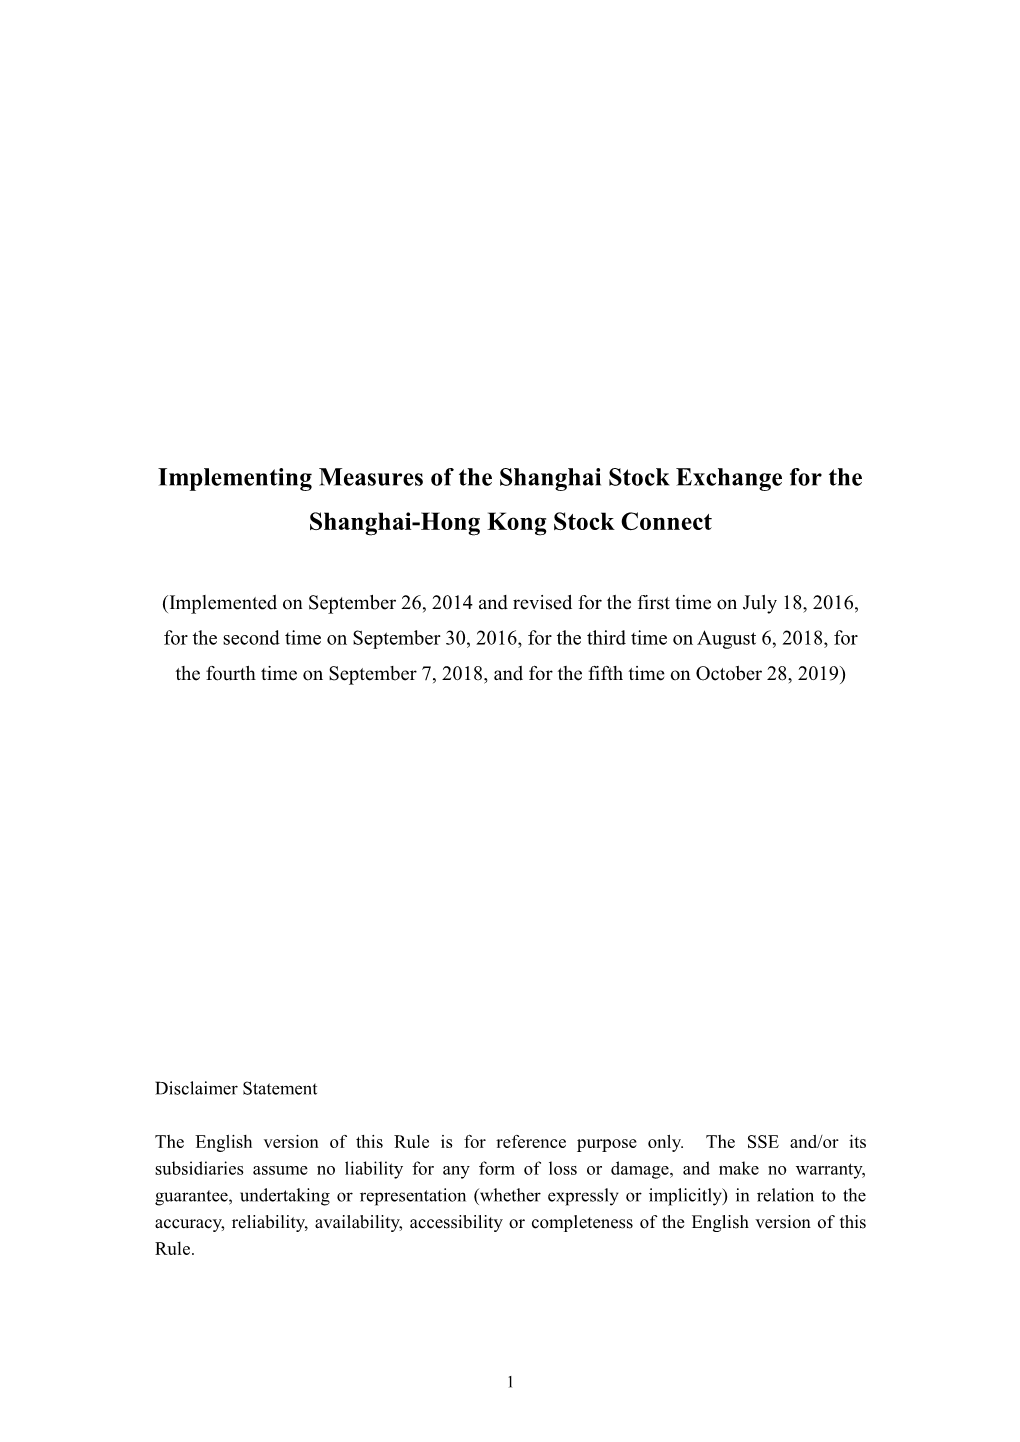 Implementing Measures of the Shanghai Stock Exchange for the Shanghai-Hong Kong Stock Connect